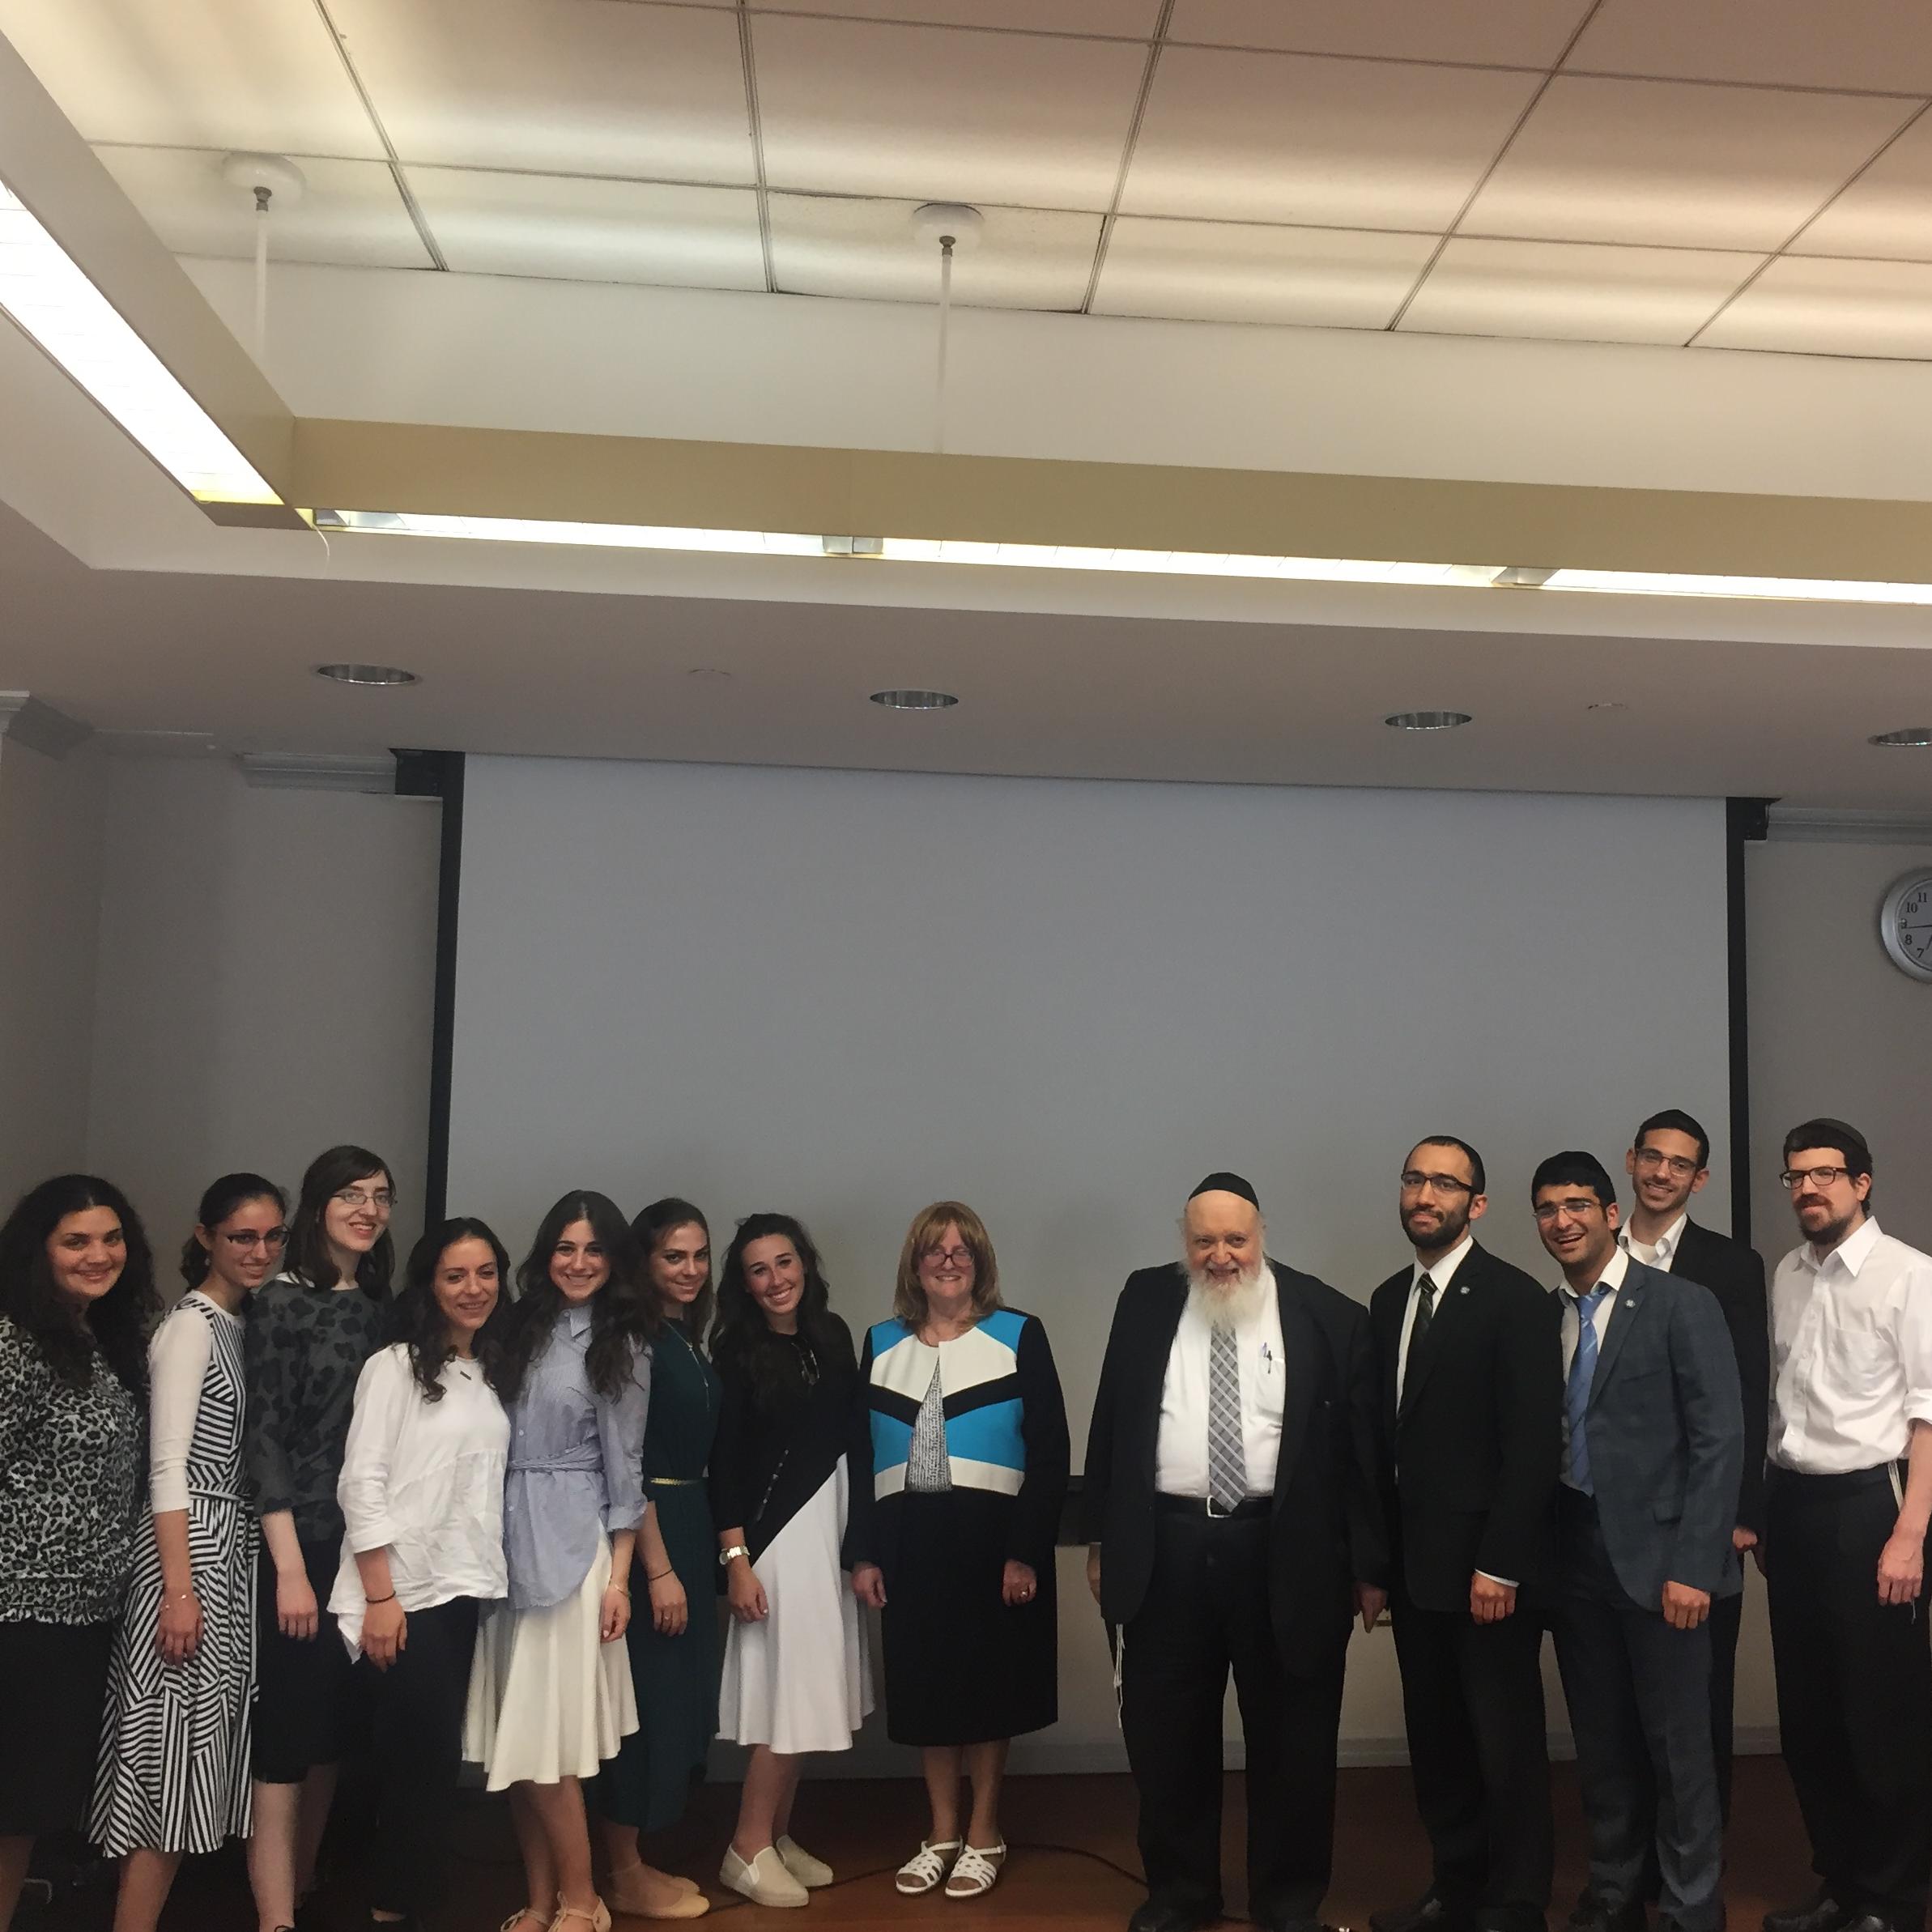 39 students from several Touro College undergraduate schools were welcomed into the prestigious Psi Chi Honor Society on June 12. 